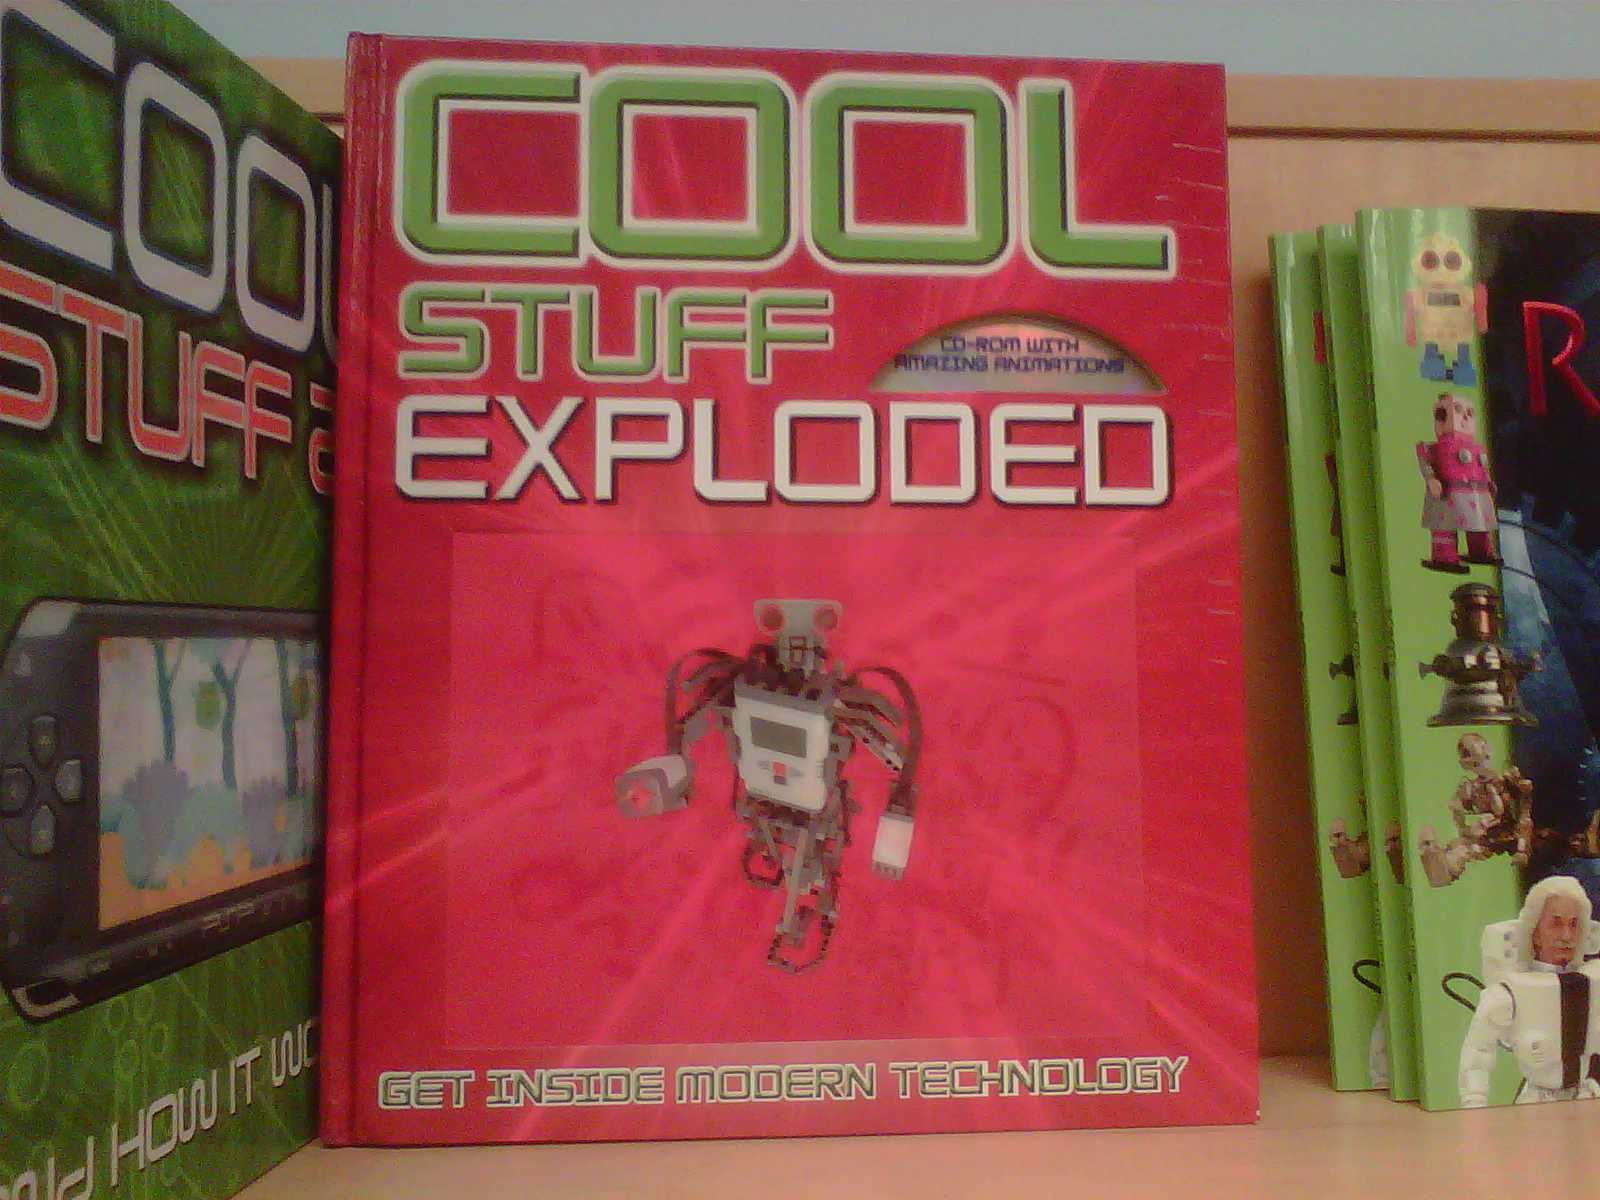 Mindstorms:  Cool and Exploded.  